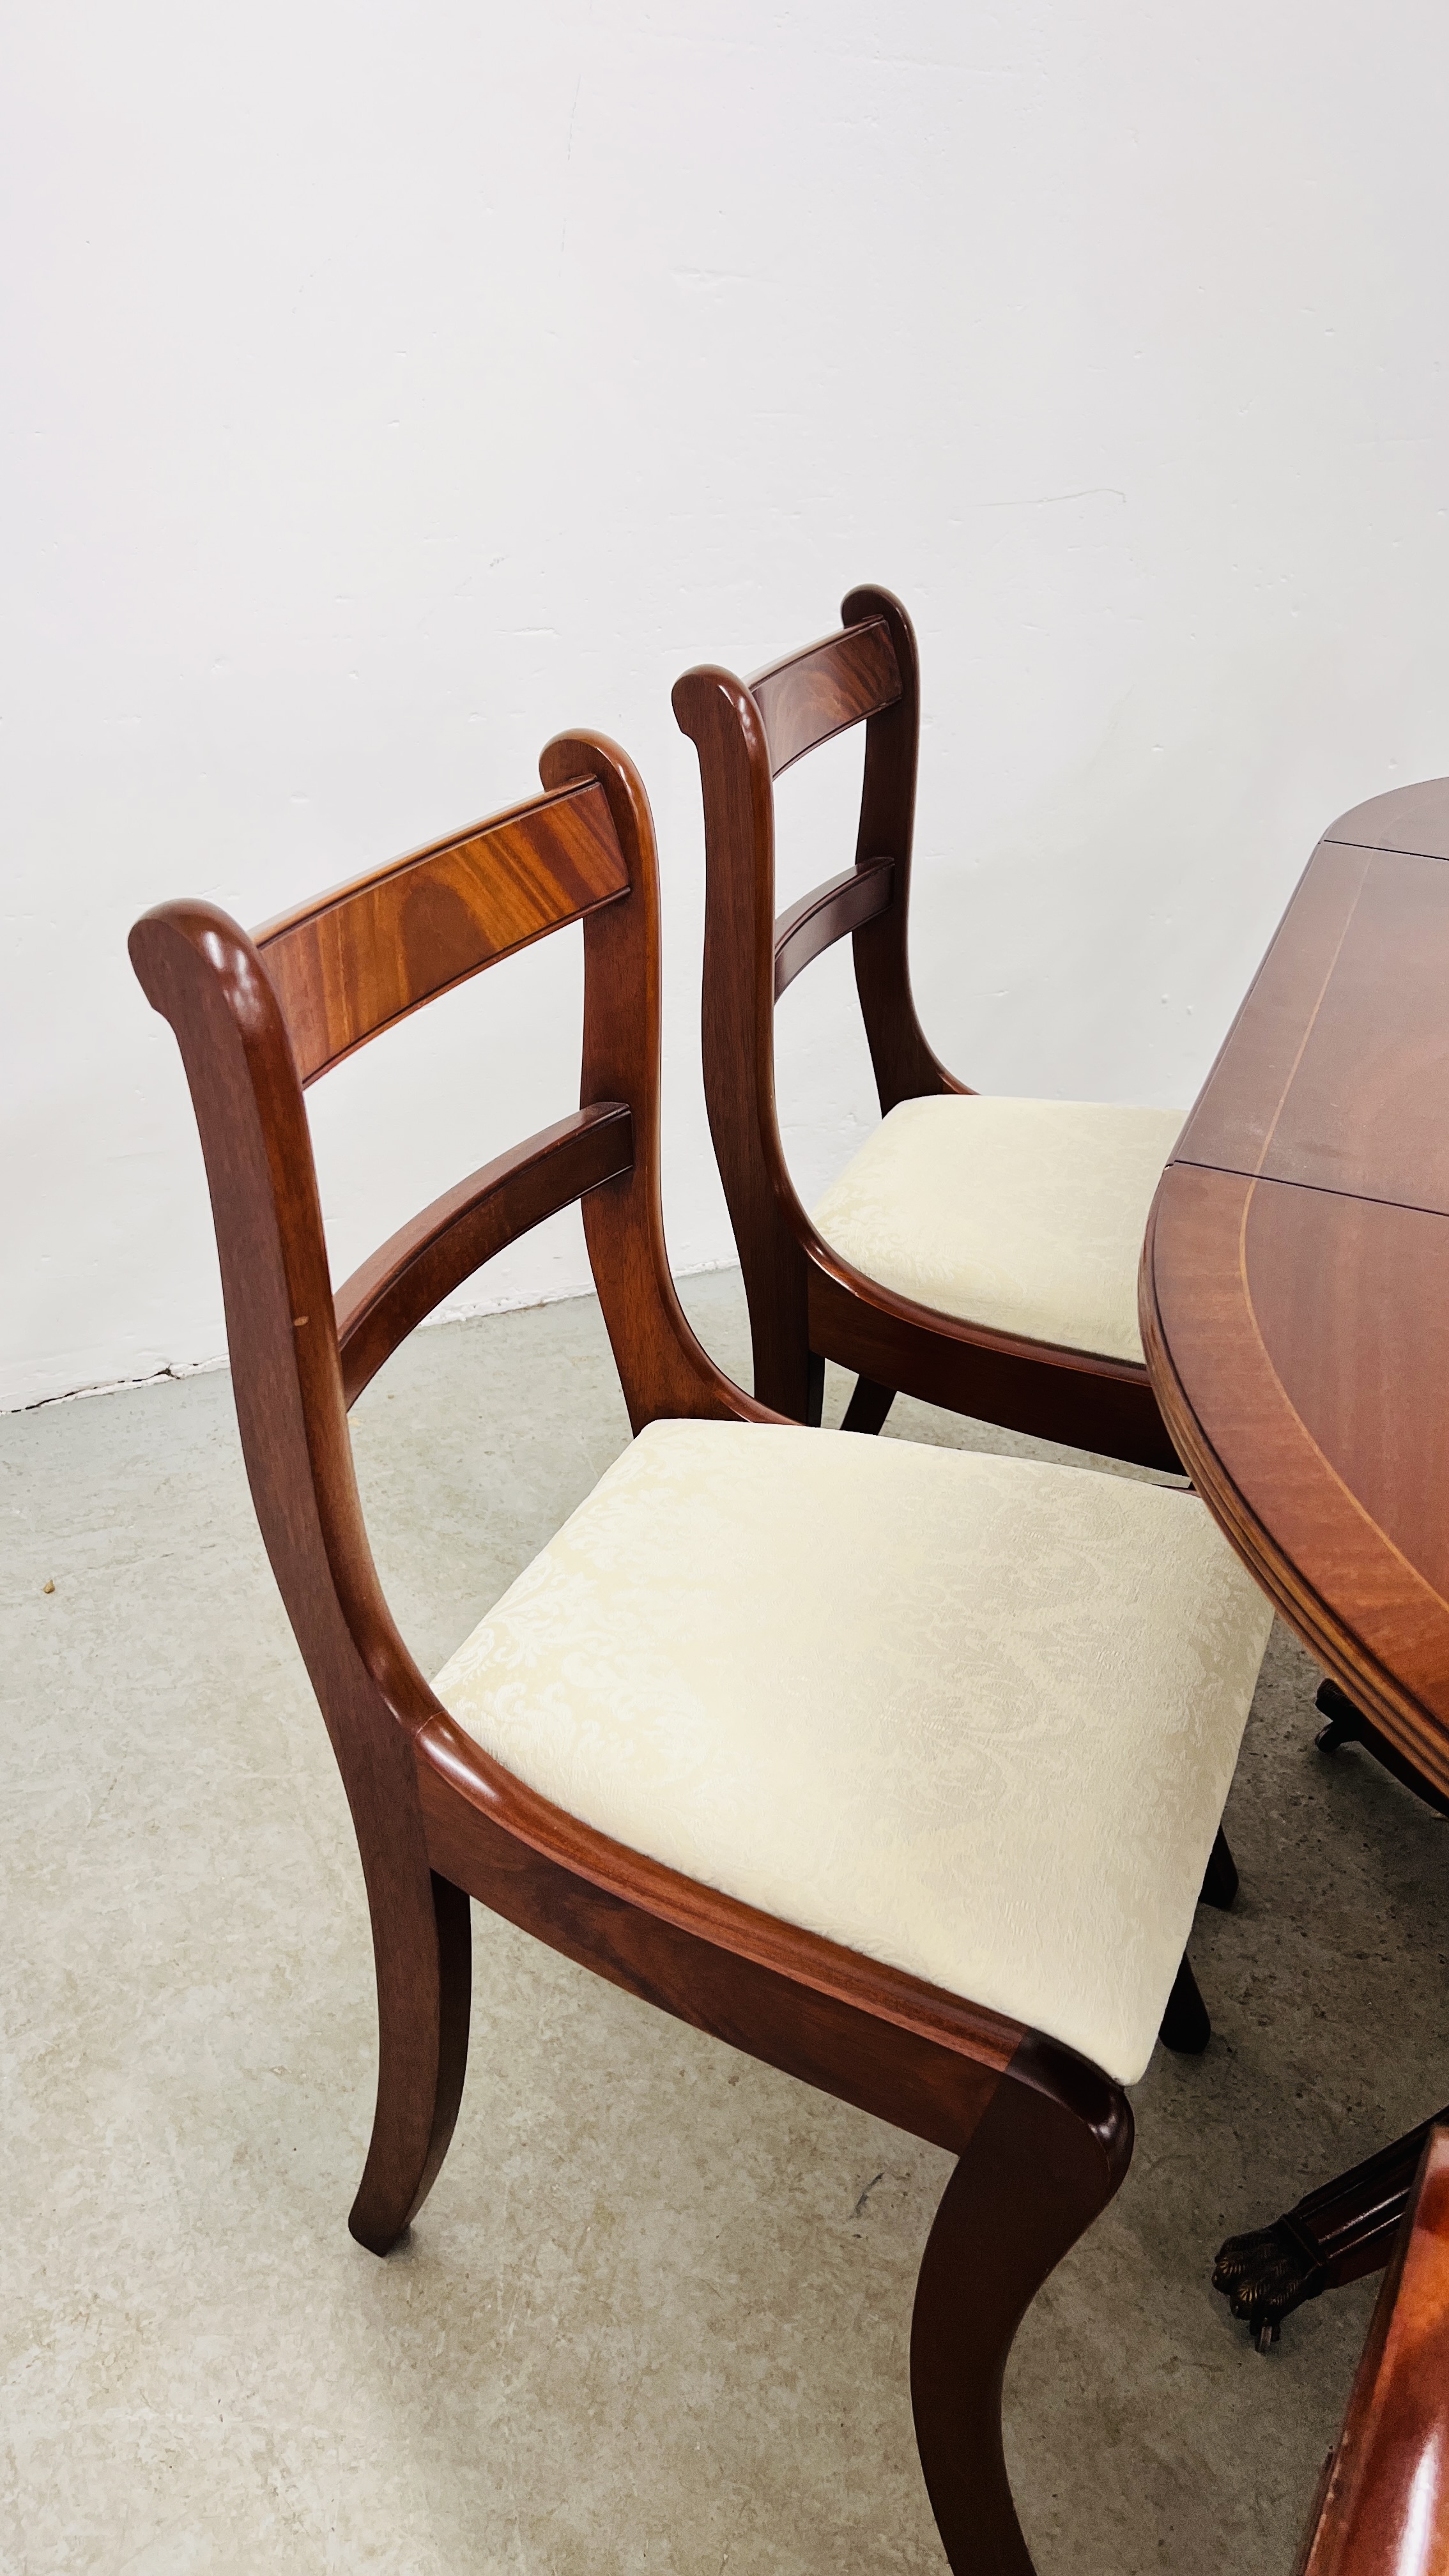 A REPRODUCTION MAHOGANY FINISH EXTENDING DROP LEAF DINING TABLE ALONG WITH 4 MATCHING CHAIRS AND 2 - Image 5 of 8